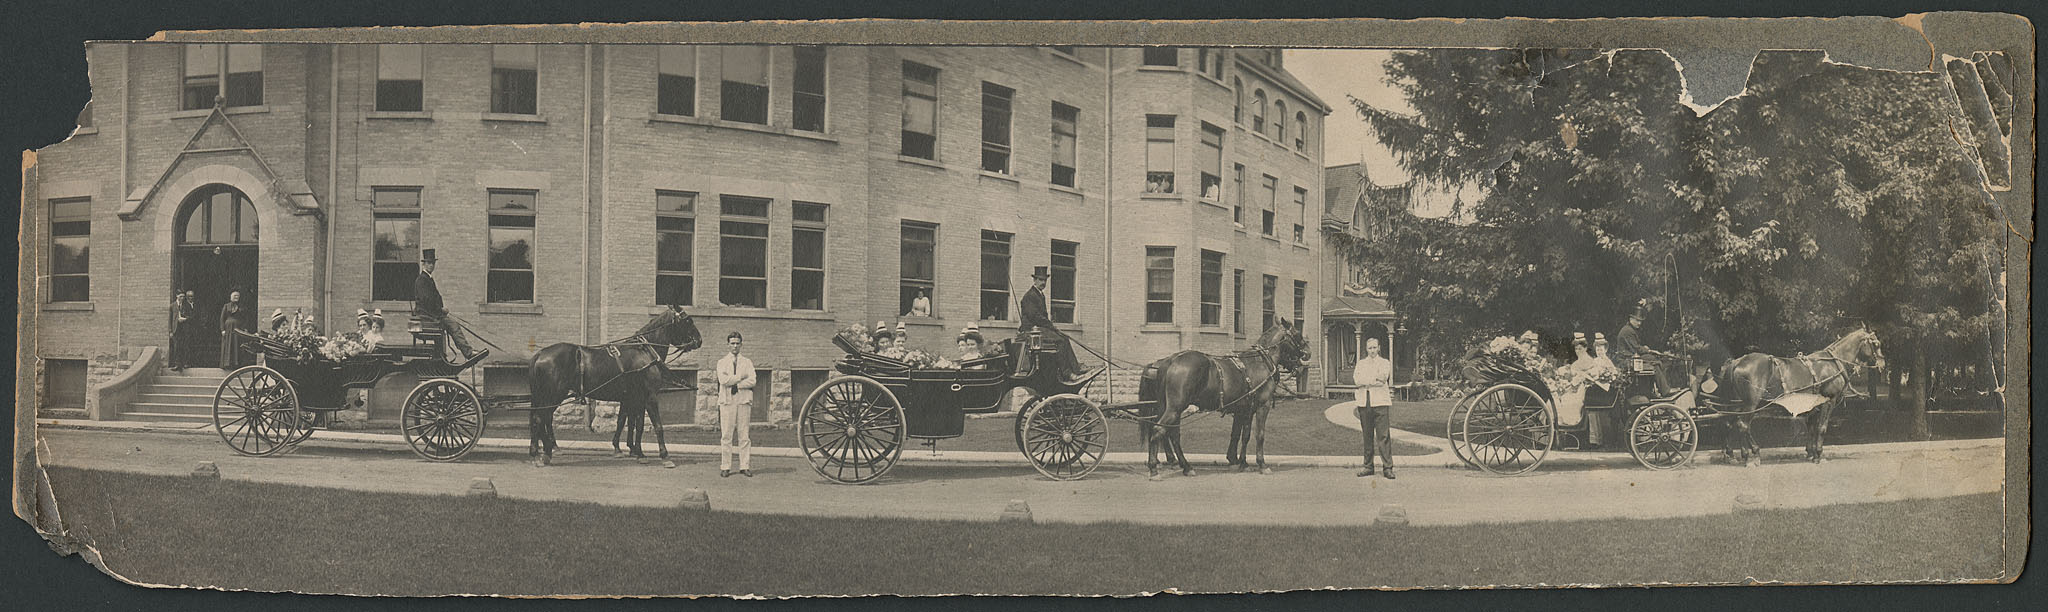 St. Joseph's School of Nursing graduation procession in front of the 1892 building at St. Joseph's Hospital, London, Ontario. Written on the back of the photograph is "P. Procession Aug/28" and a label dates it to approximately 1909.